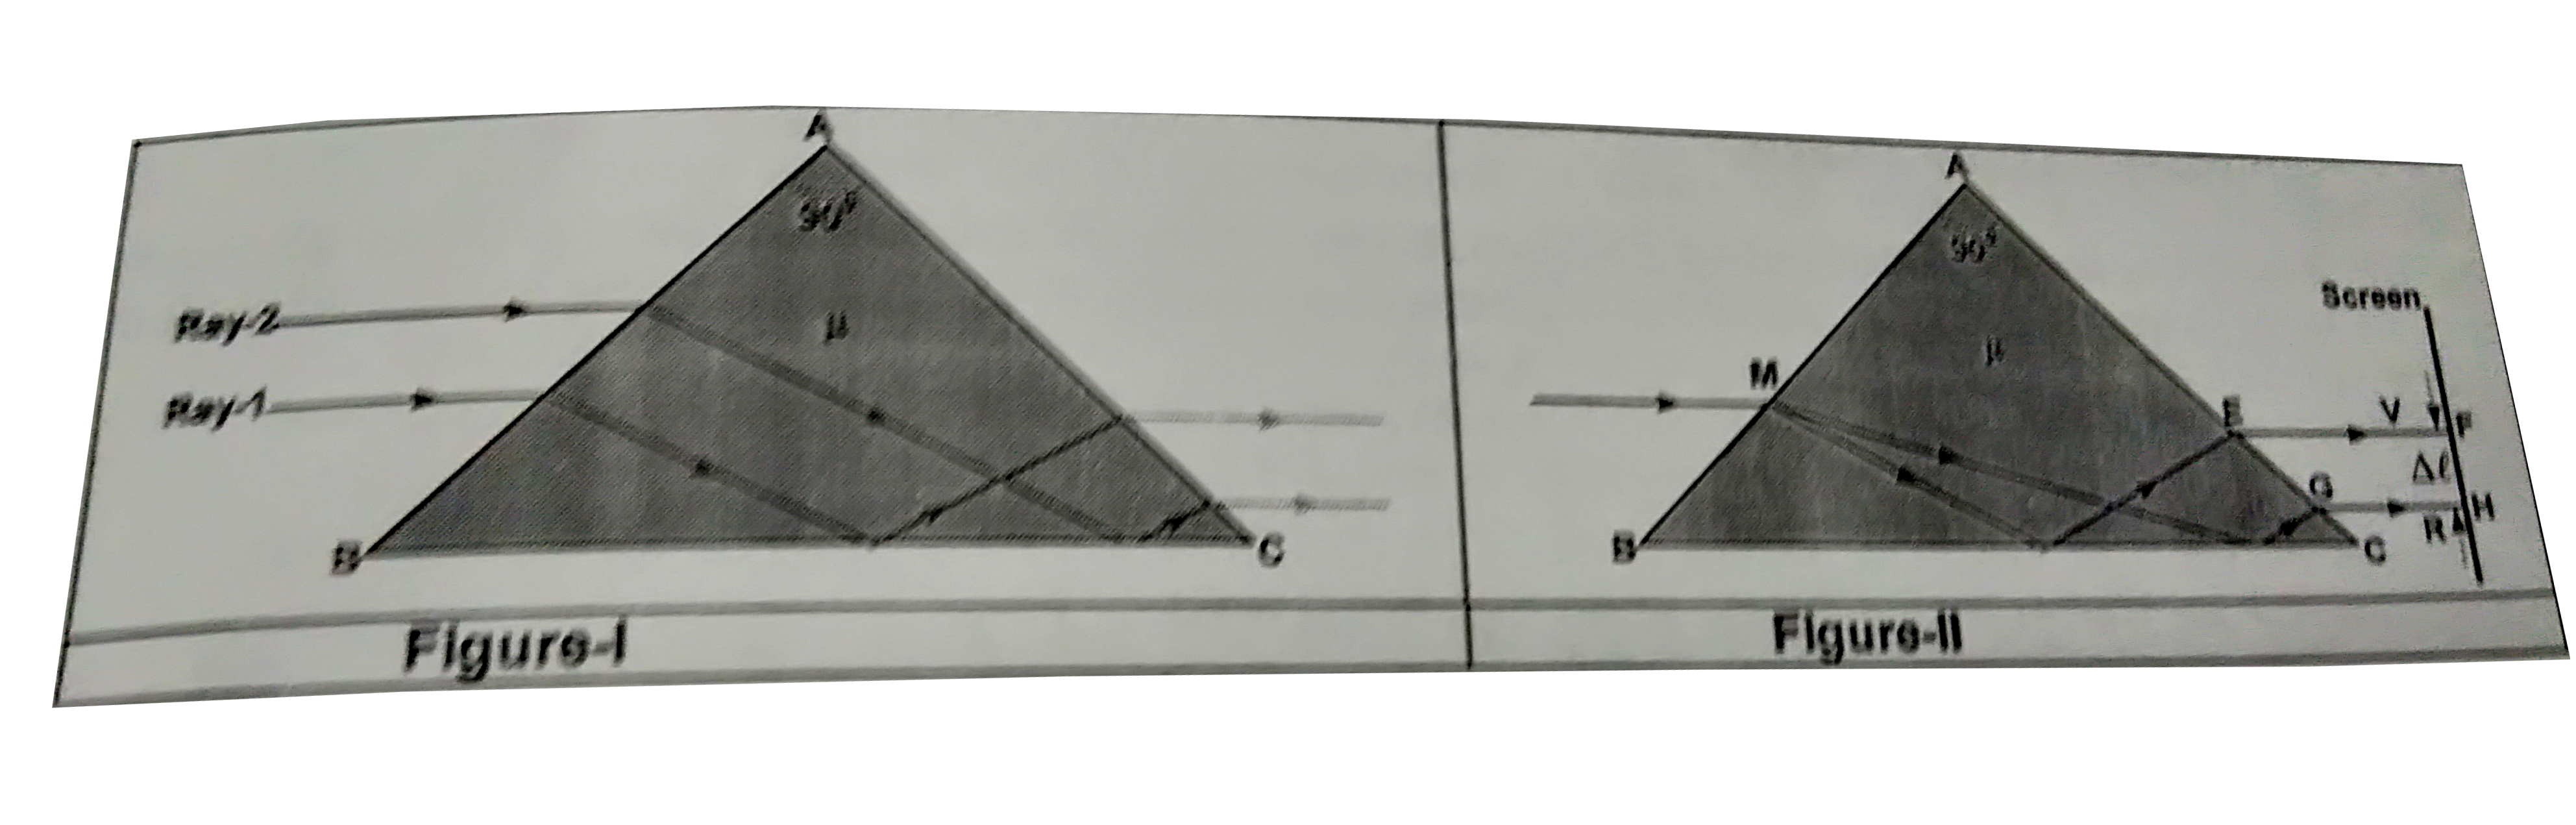 ABC is an isosceles right angled triangular refecting prism of average refractive index mu. When incident rays on face AB are parallel to face BC, then they emerges from Face AC, which are also parallel to Face BC as shown in figure-I. The prims capable to do so, known as Dove Prism. In figure II, the Dove Prism is used for dispersion of incident light containing red colour and violet colour only. The red colour and violet colour lights are separated (displaced) on screen by a distance Deltal. In reality, each ray of any colour has some width, which can be designated as d. It is clear that an observer candistinguish the red and violet rays that emerges from prism only if Deltalged. Otherwise the bundles of rays will overlap and mix.   [Given for Dove Prism in figure II: mu(R)=sqrt(5/2),Deltamu=mu(V)-mu(R)=0.02, sqrt(5)=2.25, EF1m and AB=4cm]      Find the maximum value of width d of bundle of rays that can be resolved at the outlet of Dove Prism as shown in the figureII